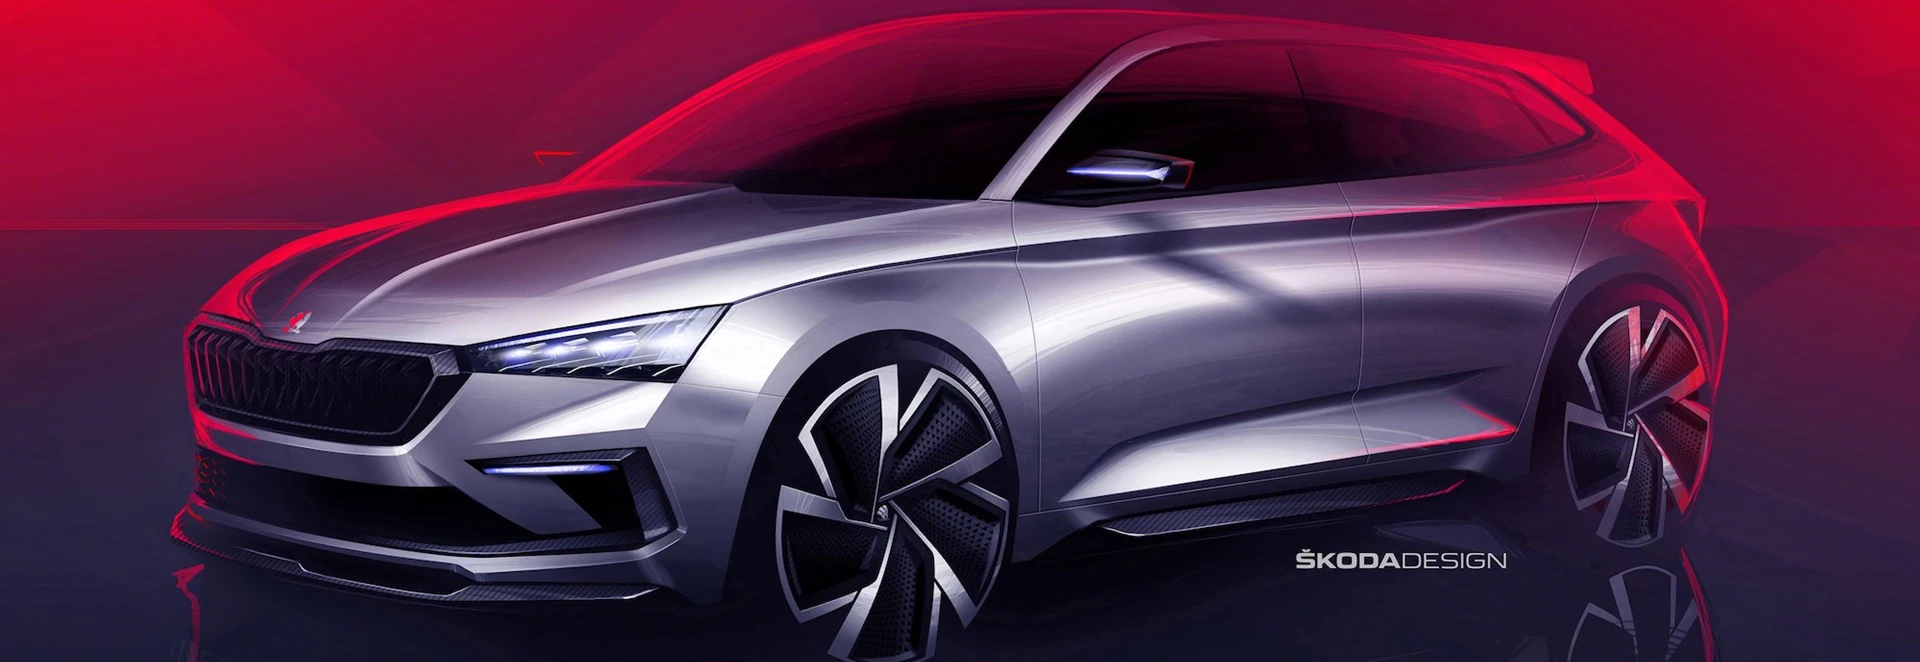 Skoda teases concept for future compact model